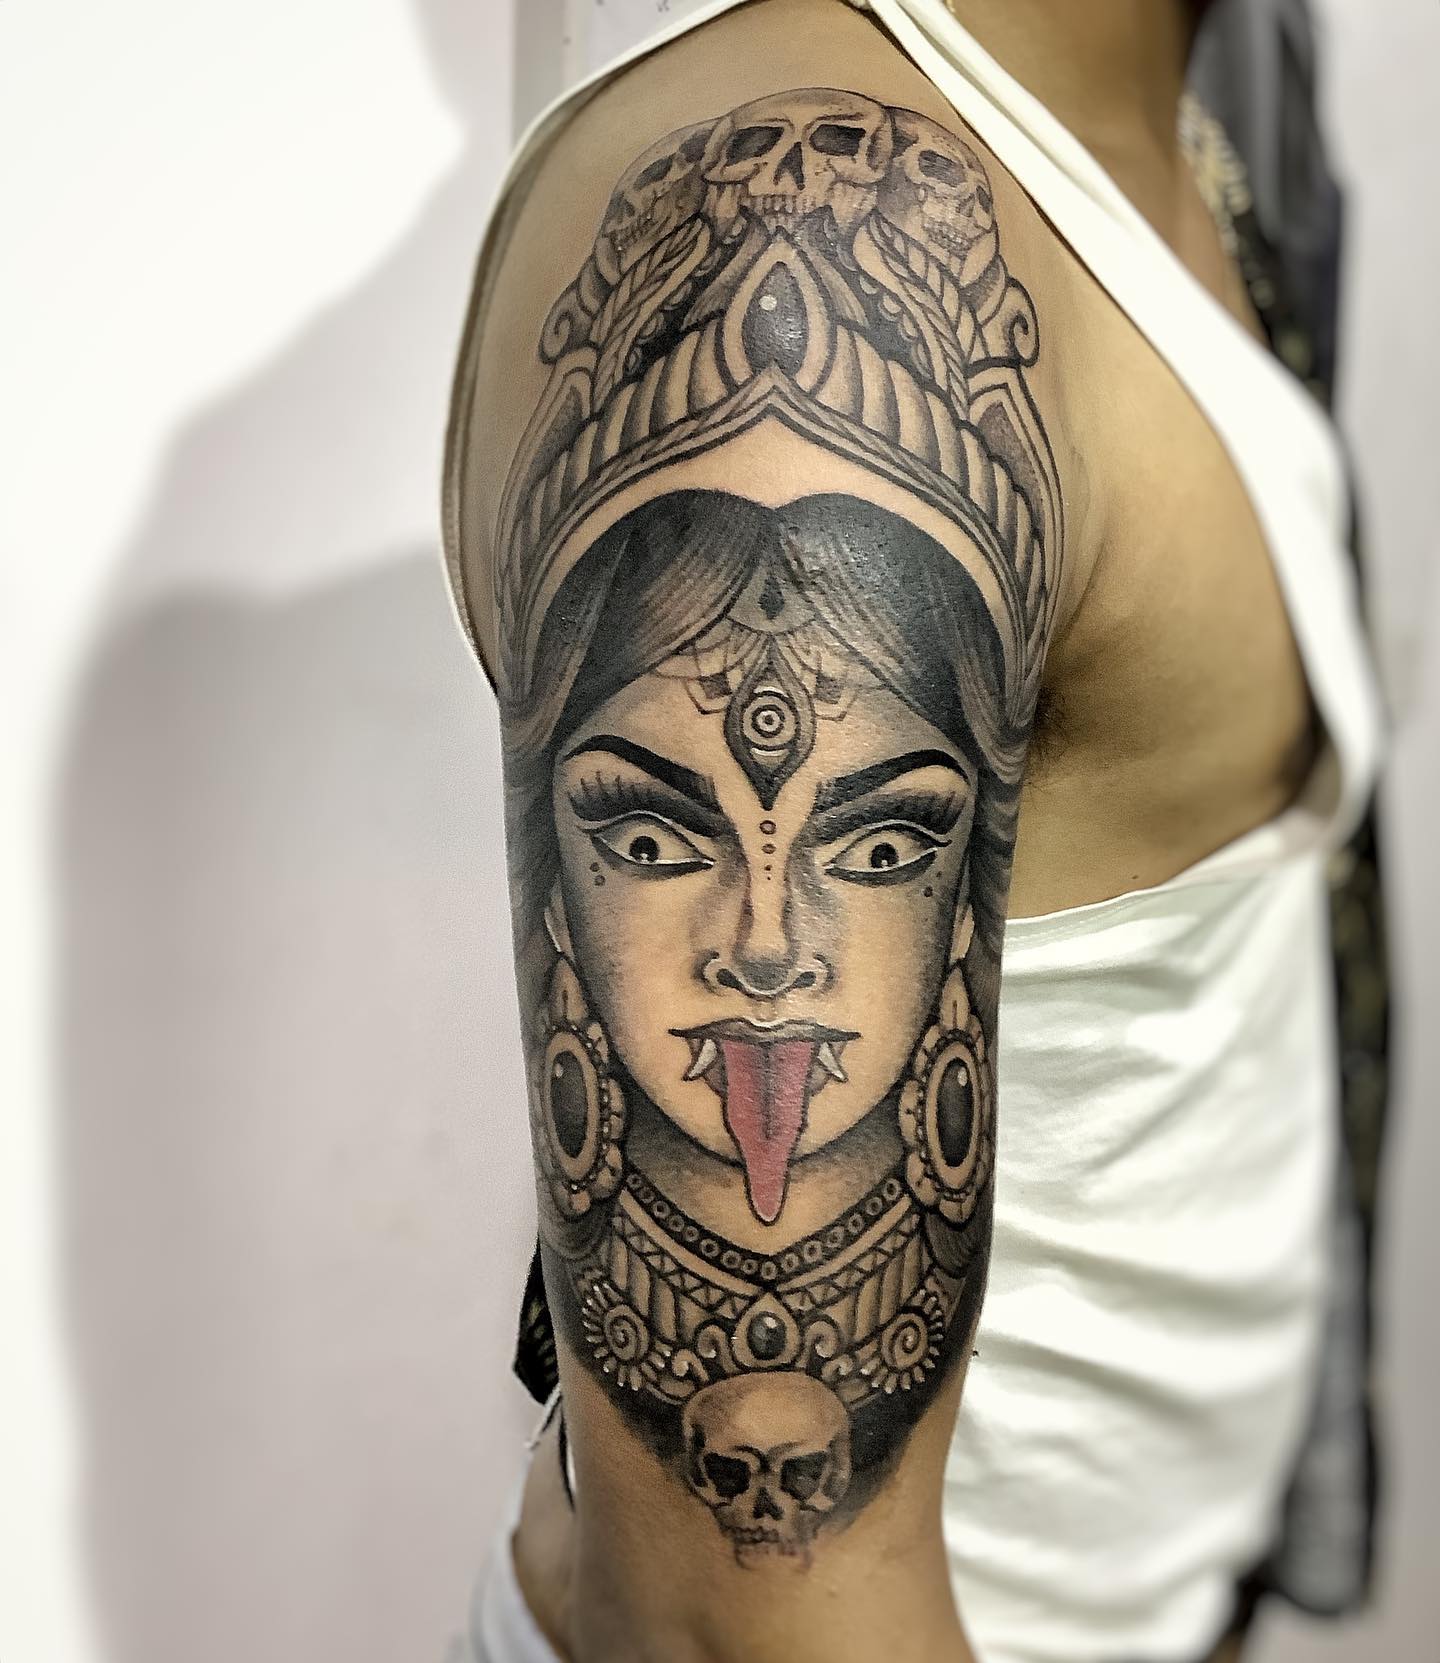 Kali tattoo located on the inner forearm.